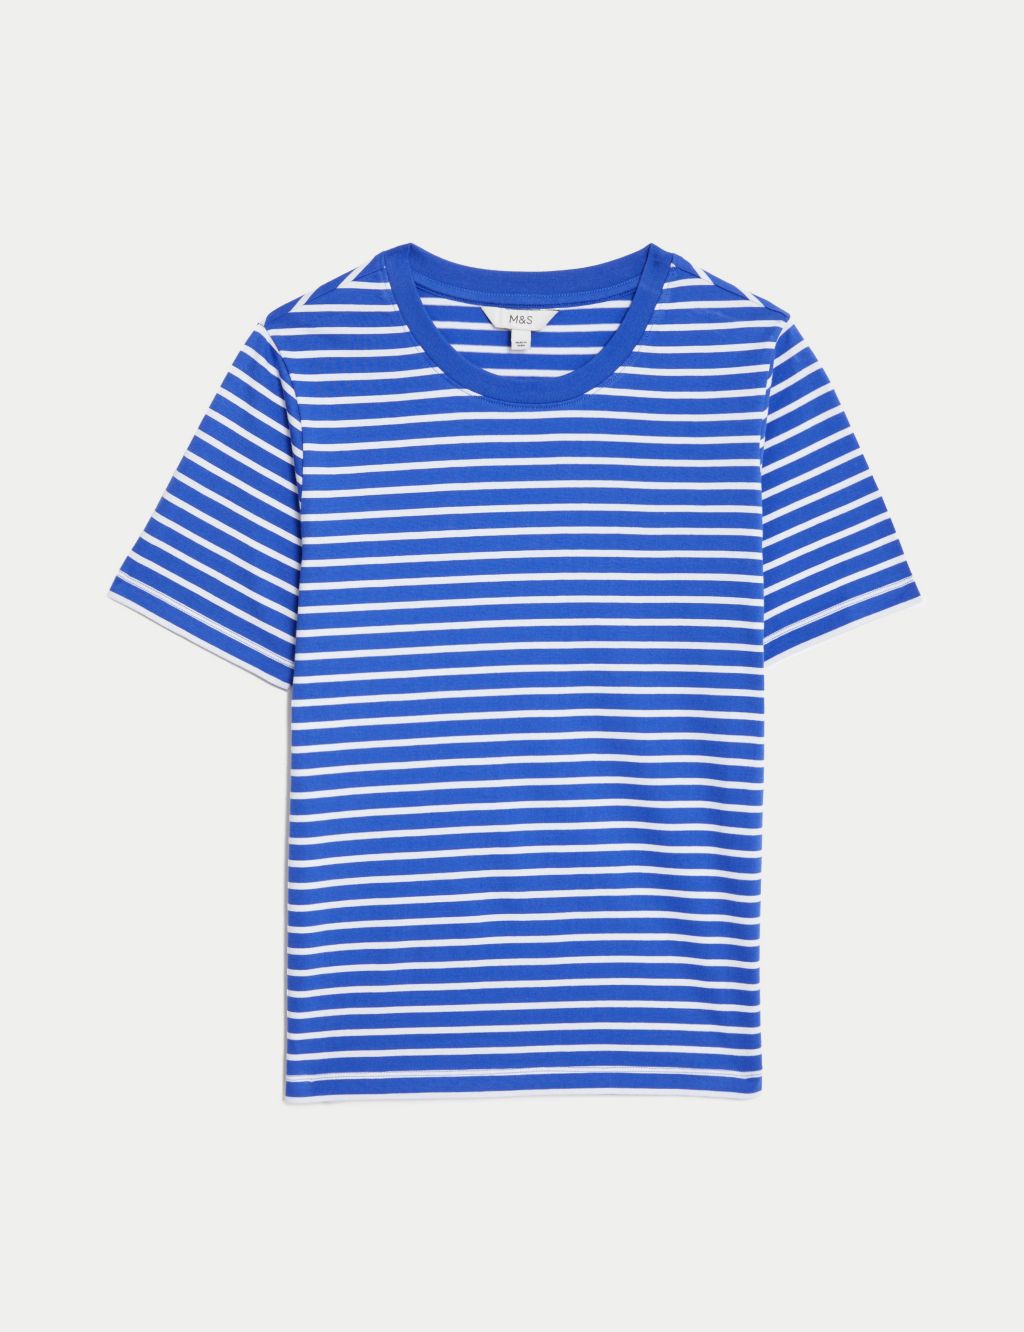 Pure Cotton Striped Everyday Fit T-Shirt